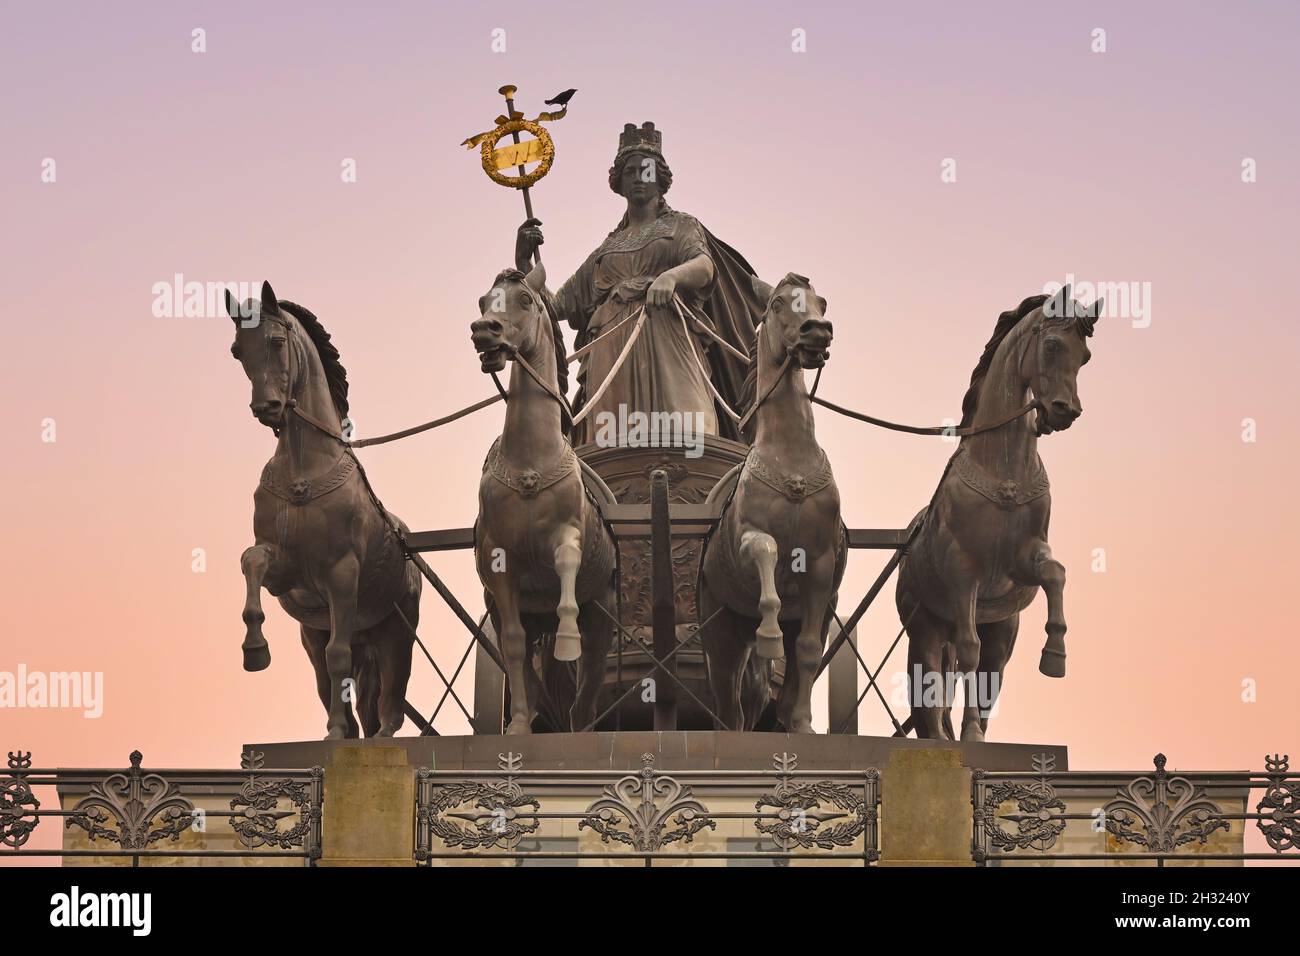 Quadriga. Four-horsed chariot. Statue on the portico of the Ducal Palace, Residence Palace in Braunschweig, Lower Saxony, Germany. Stock Photo